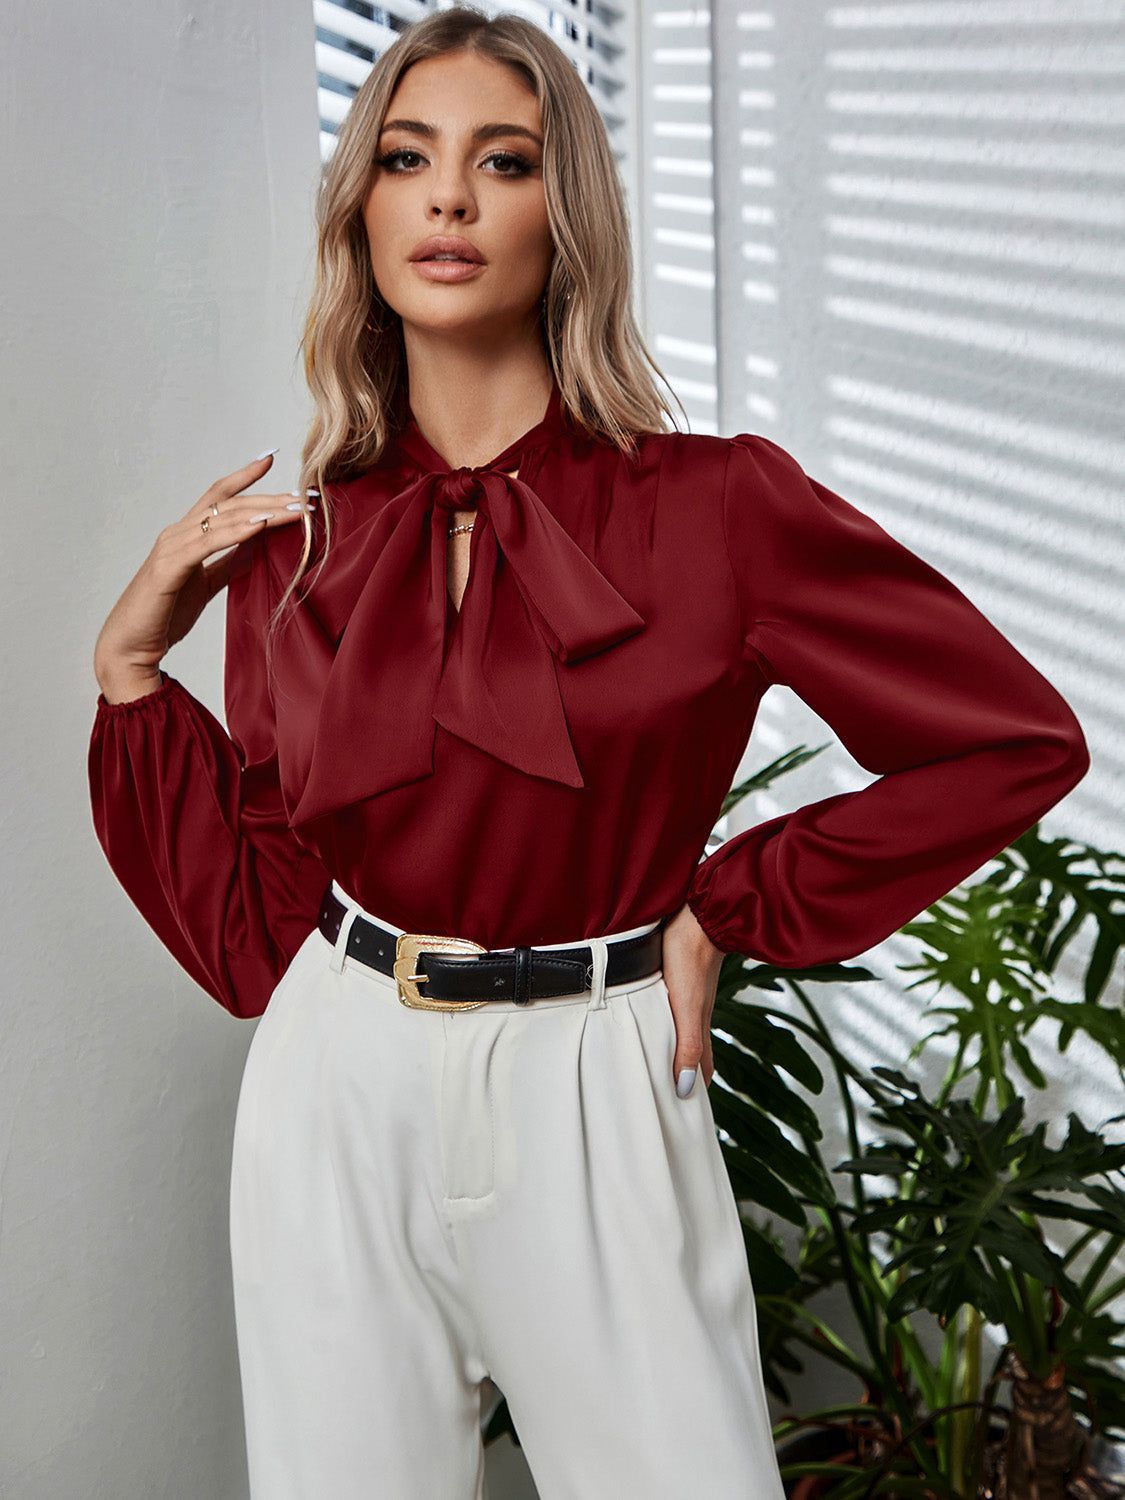 Silky Wine Bow Blouse